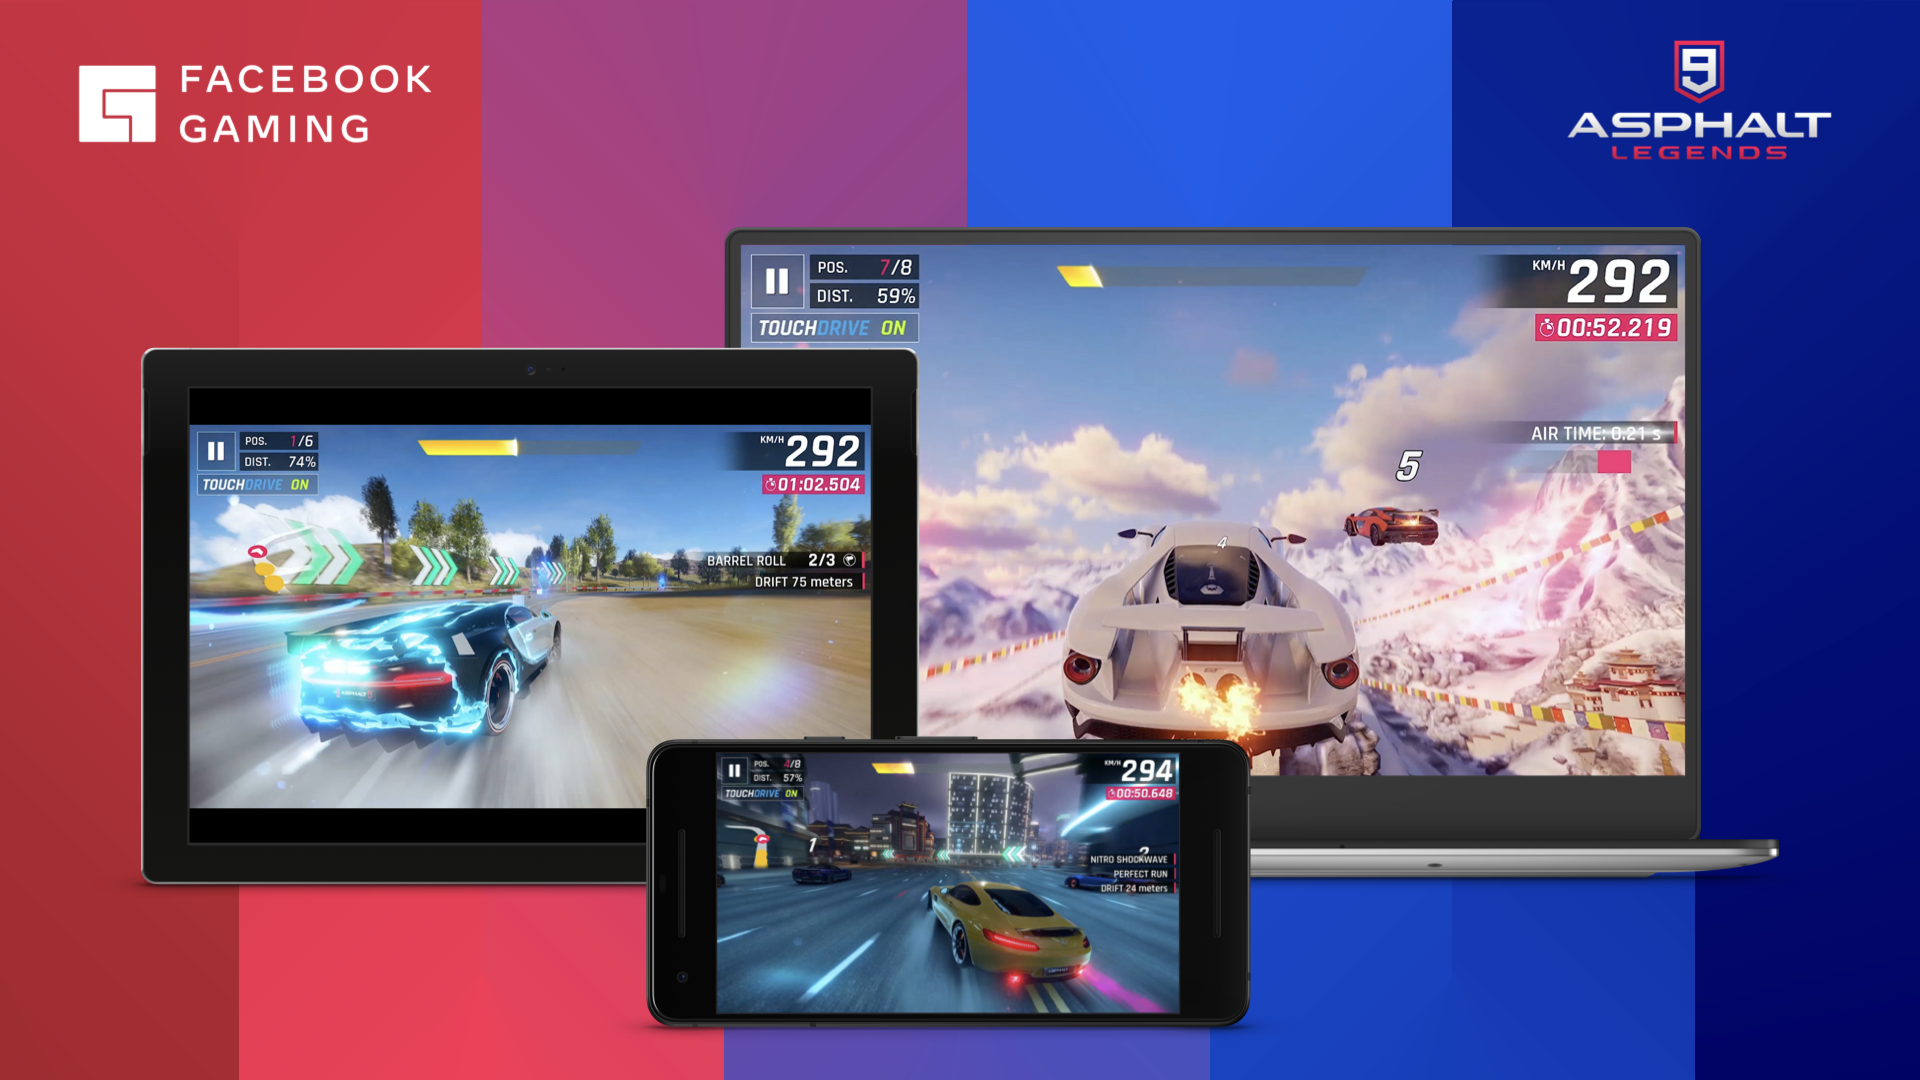 Facebook's cloud-gaming offering focuses on free-to-play mobile